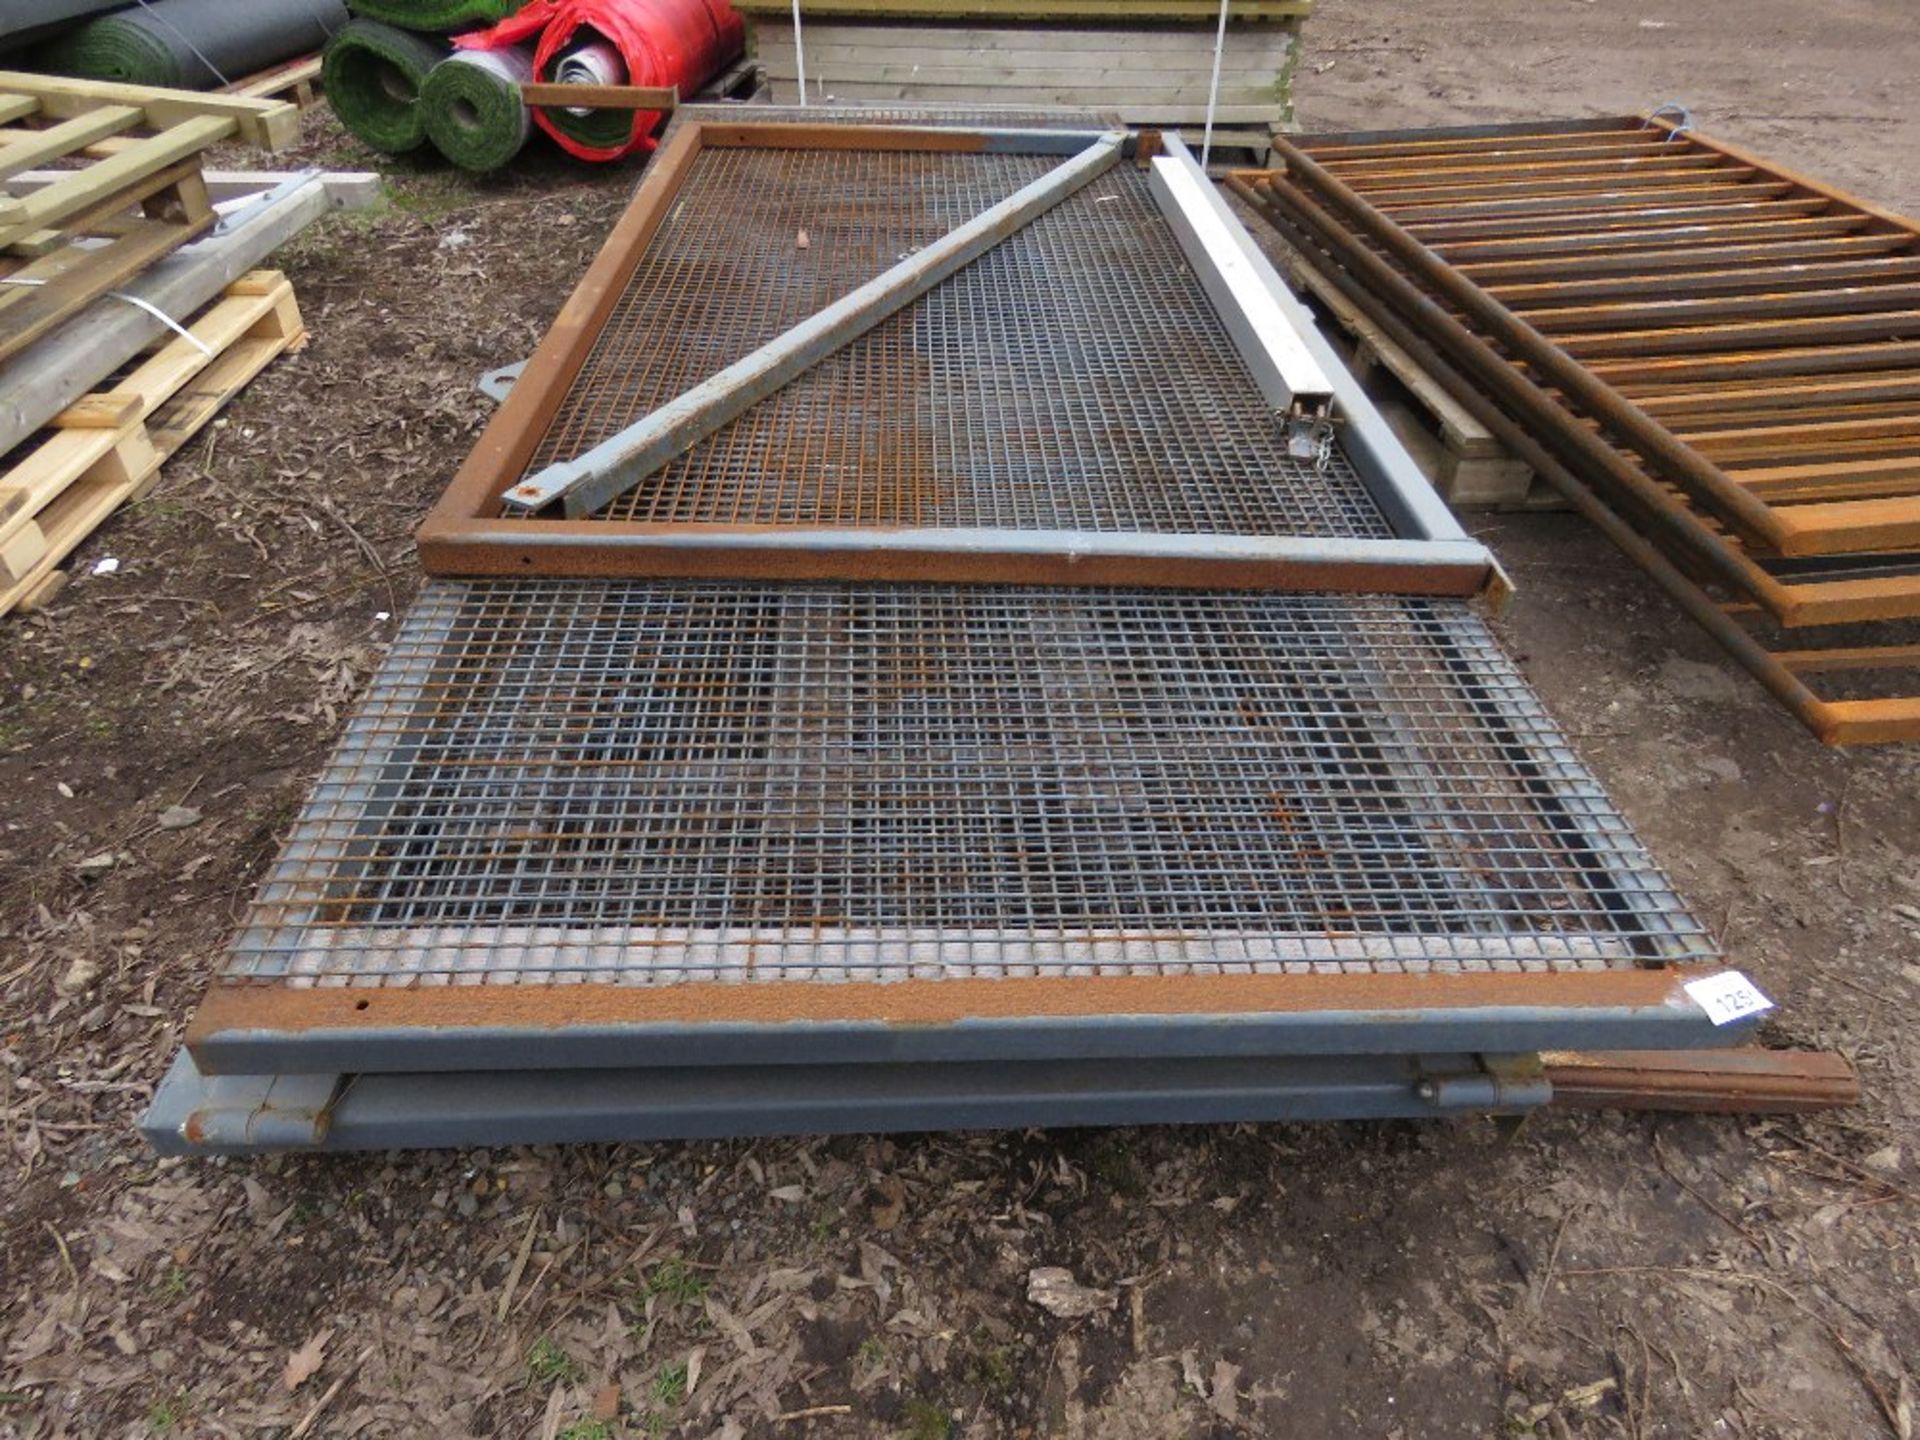 SET OF MESH CAGE SIDE EXTENSIONS FOR FORD TRANSIT TIPPER, 2.2M LENGTH, 1.23M HEIGHT APPROX. THIS - Image 3 of 4